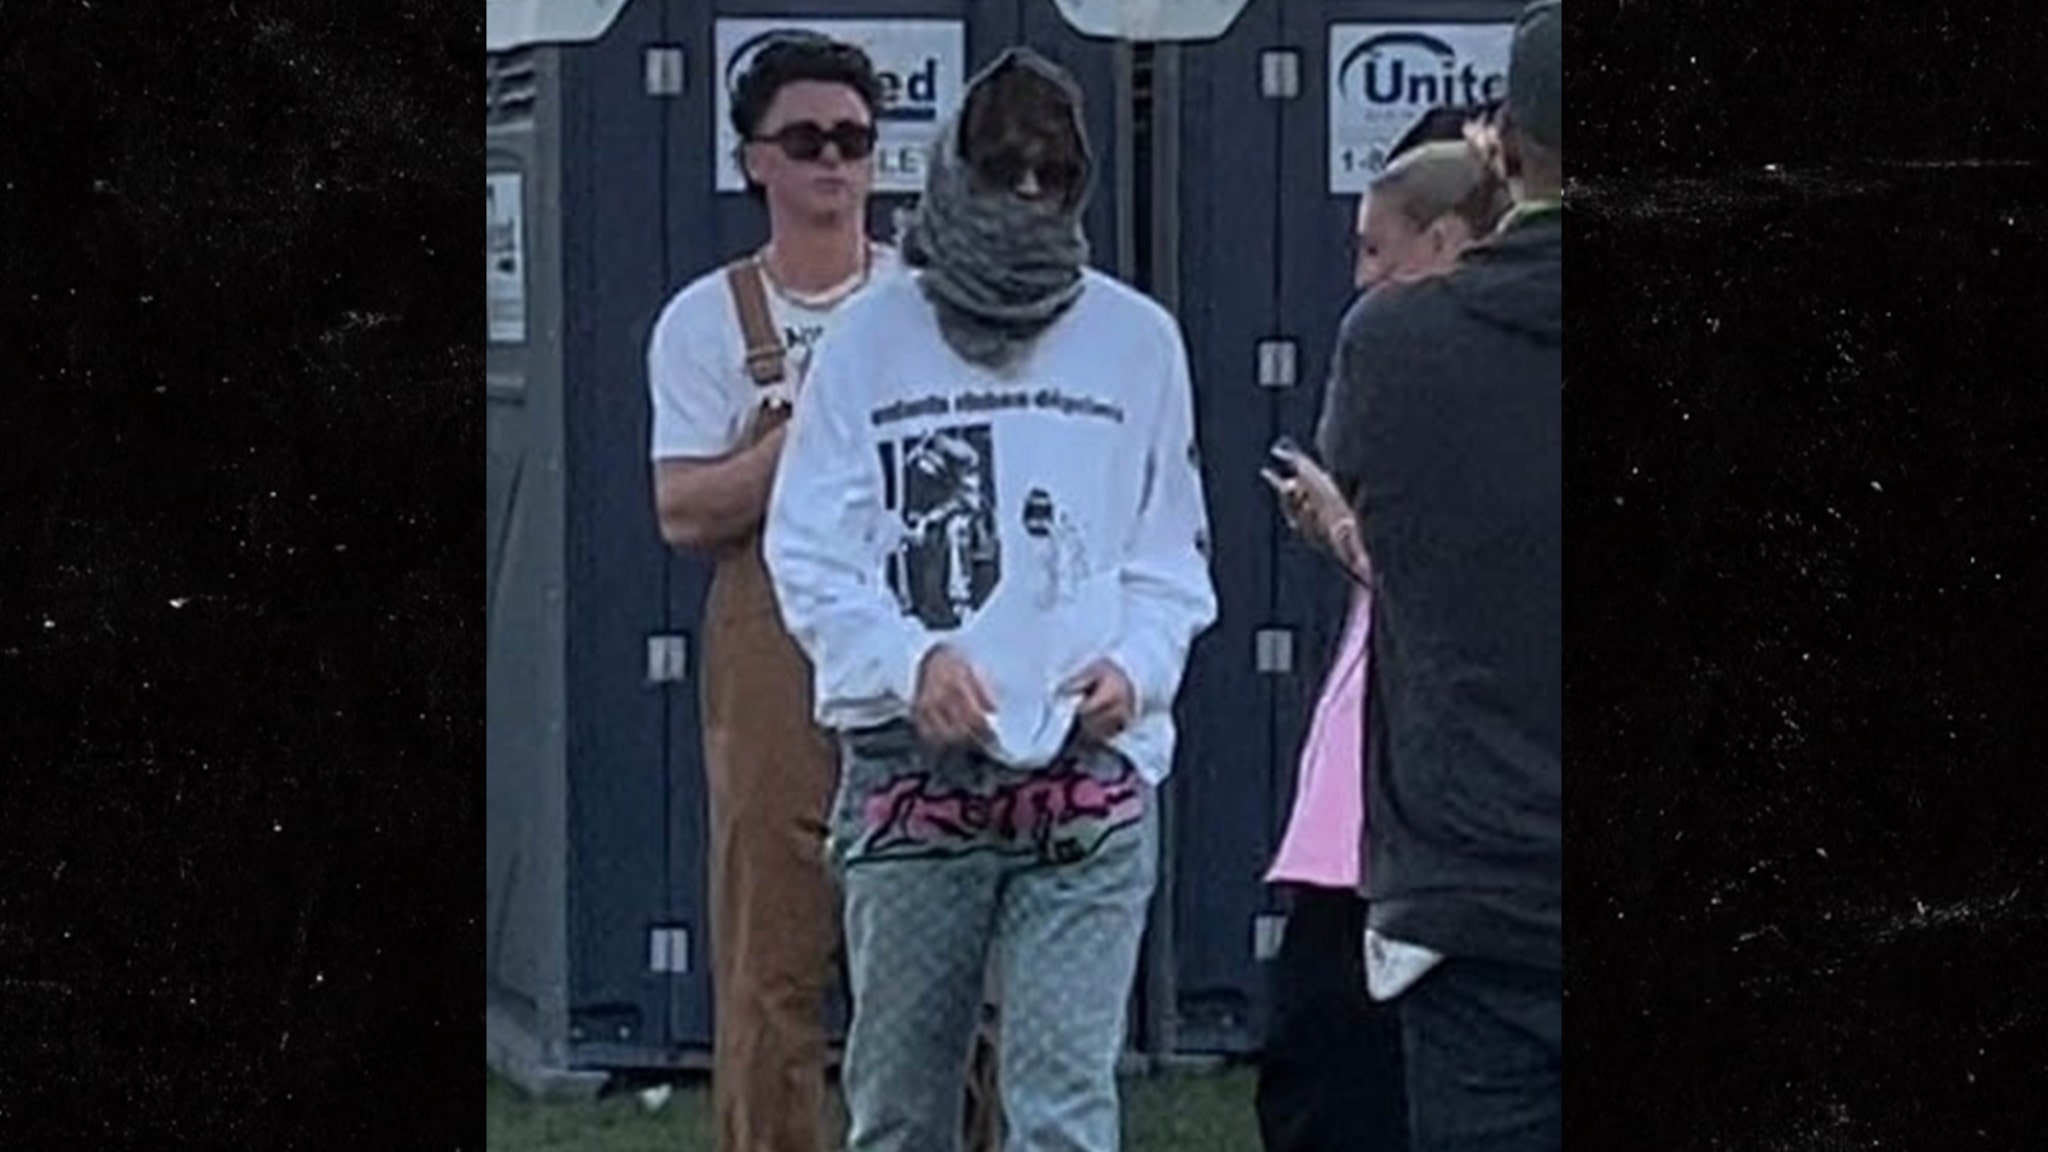 Timothee Chalamet goes incognito at Coachella amid dating rumors with Kylie Jenner